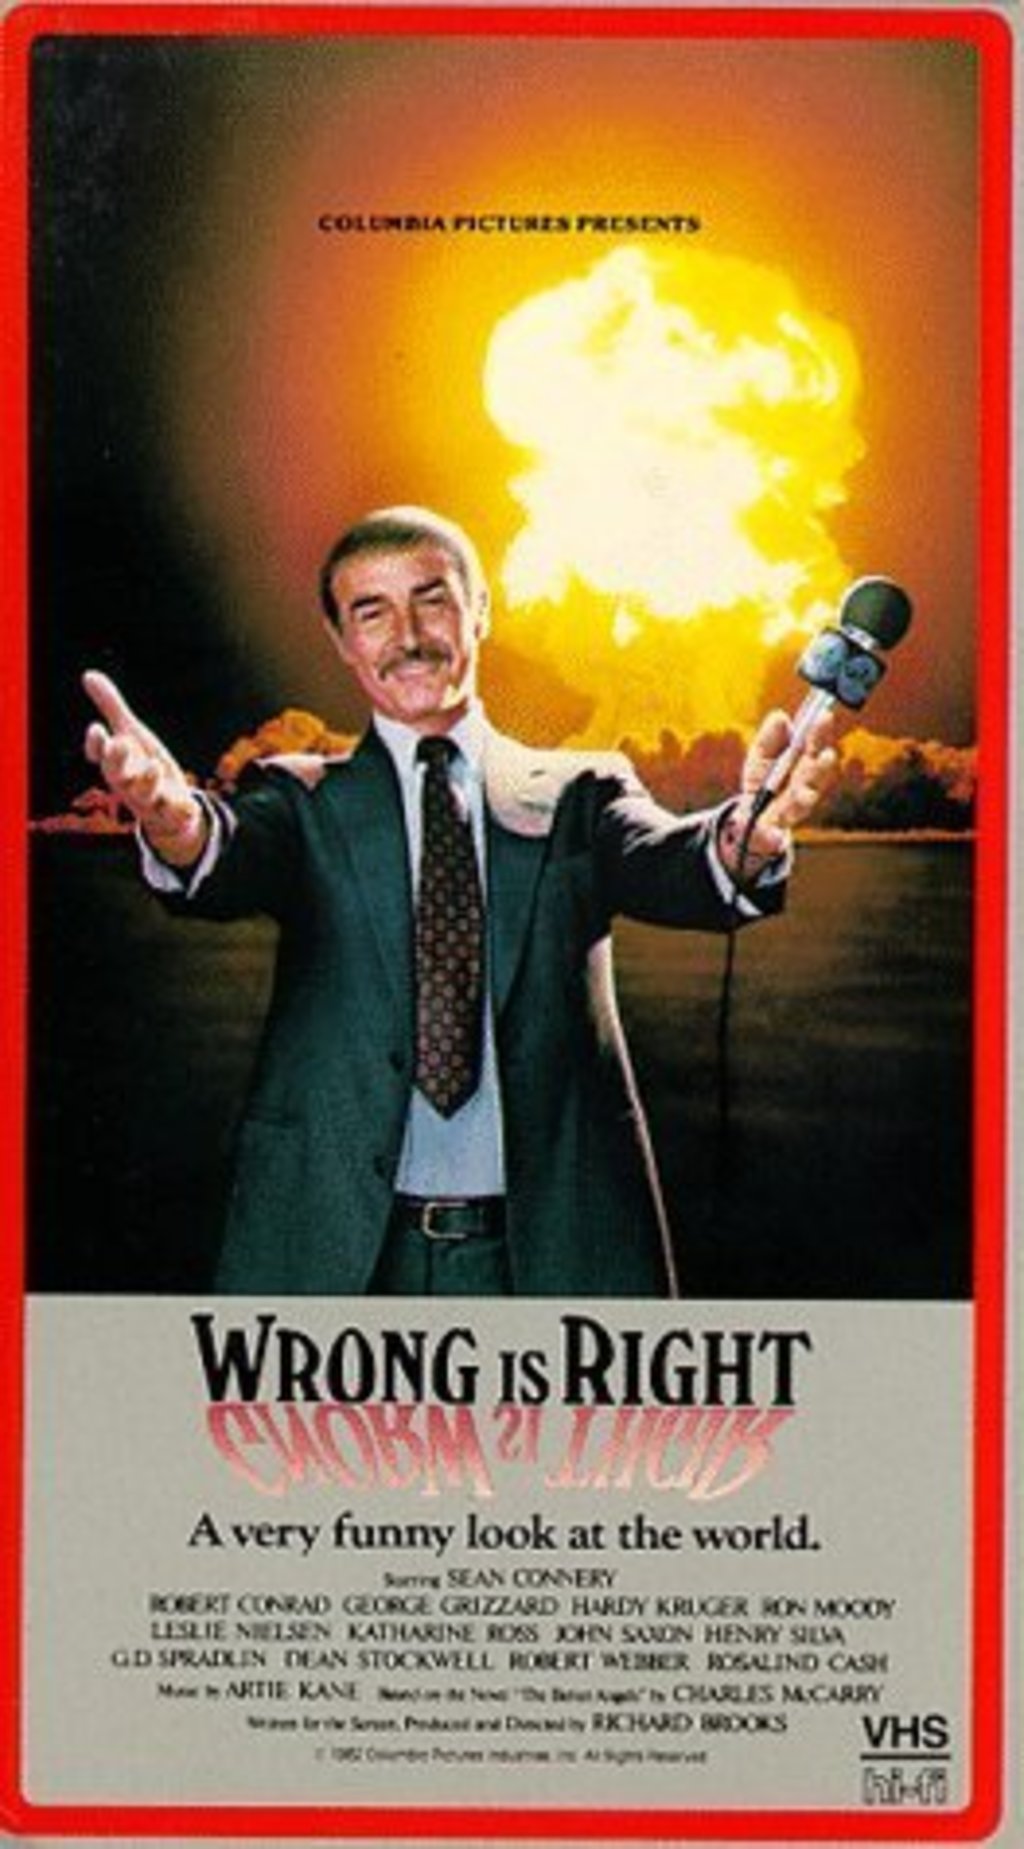 Watch Wrong Is Right on Netflix Today! | NetflixMovies.com